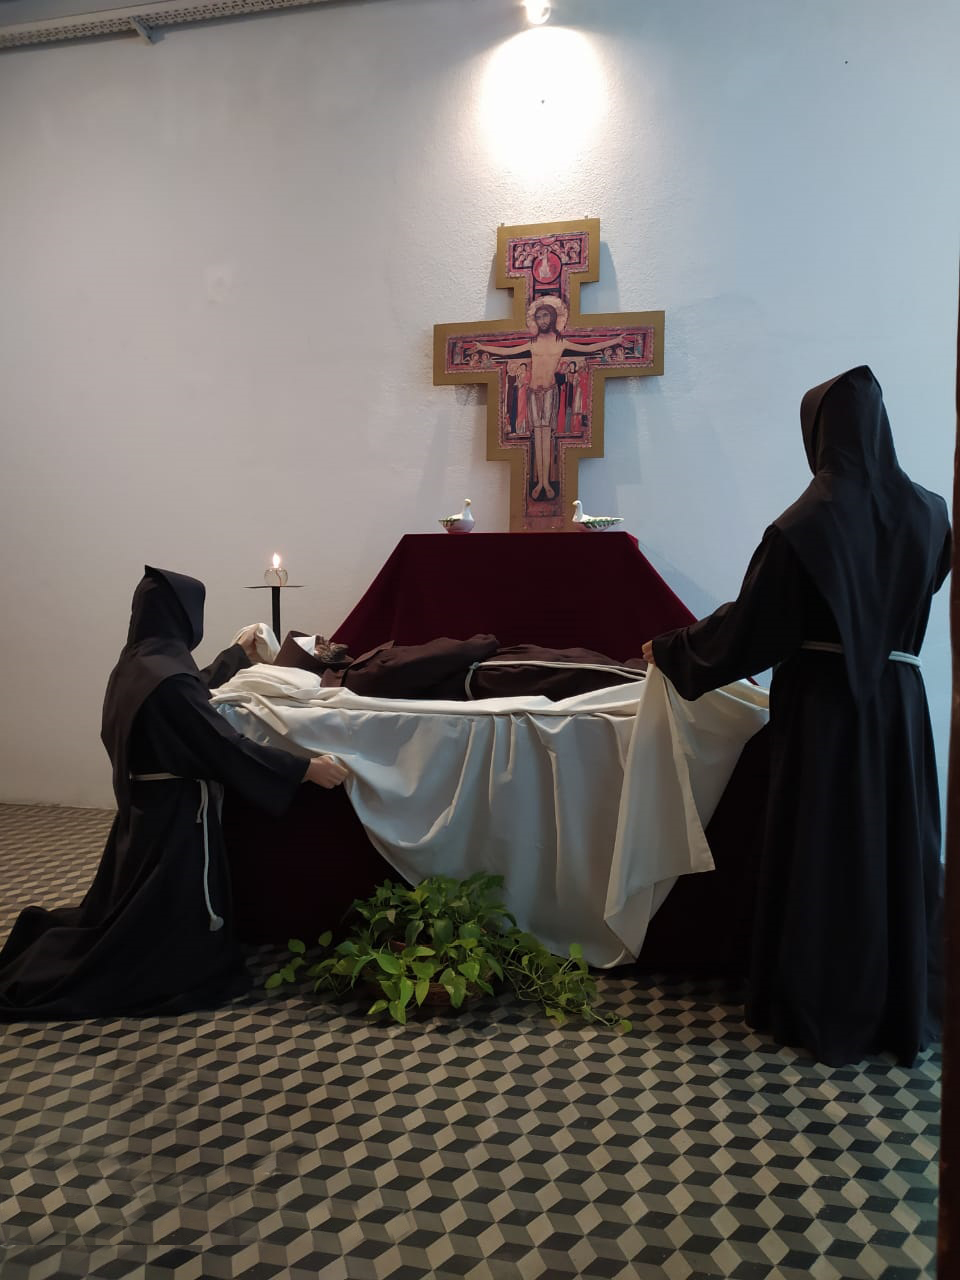 The friars of the monastery of Buenos Aires while commemorating the Transitus of St. Francis of Assisi, October 2020